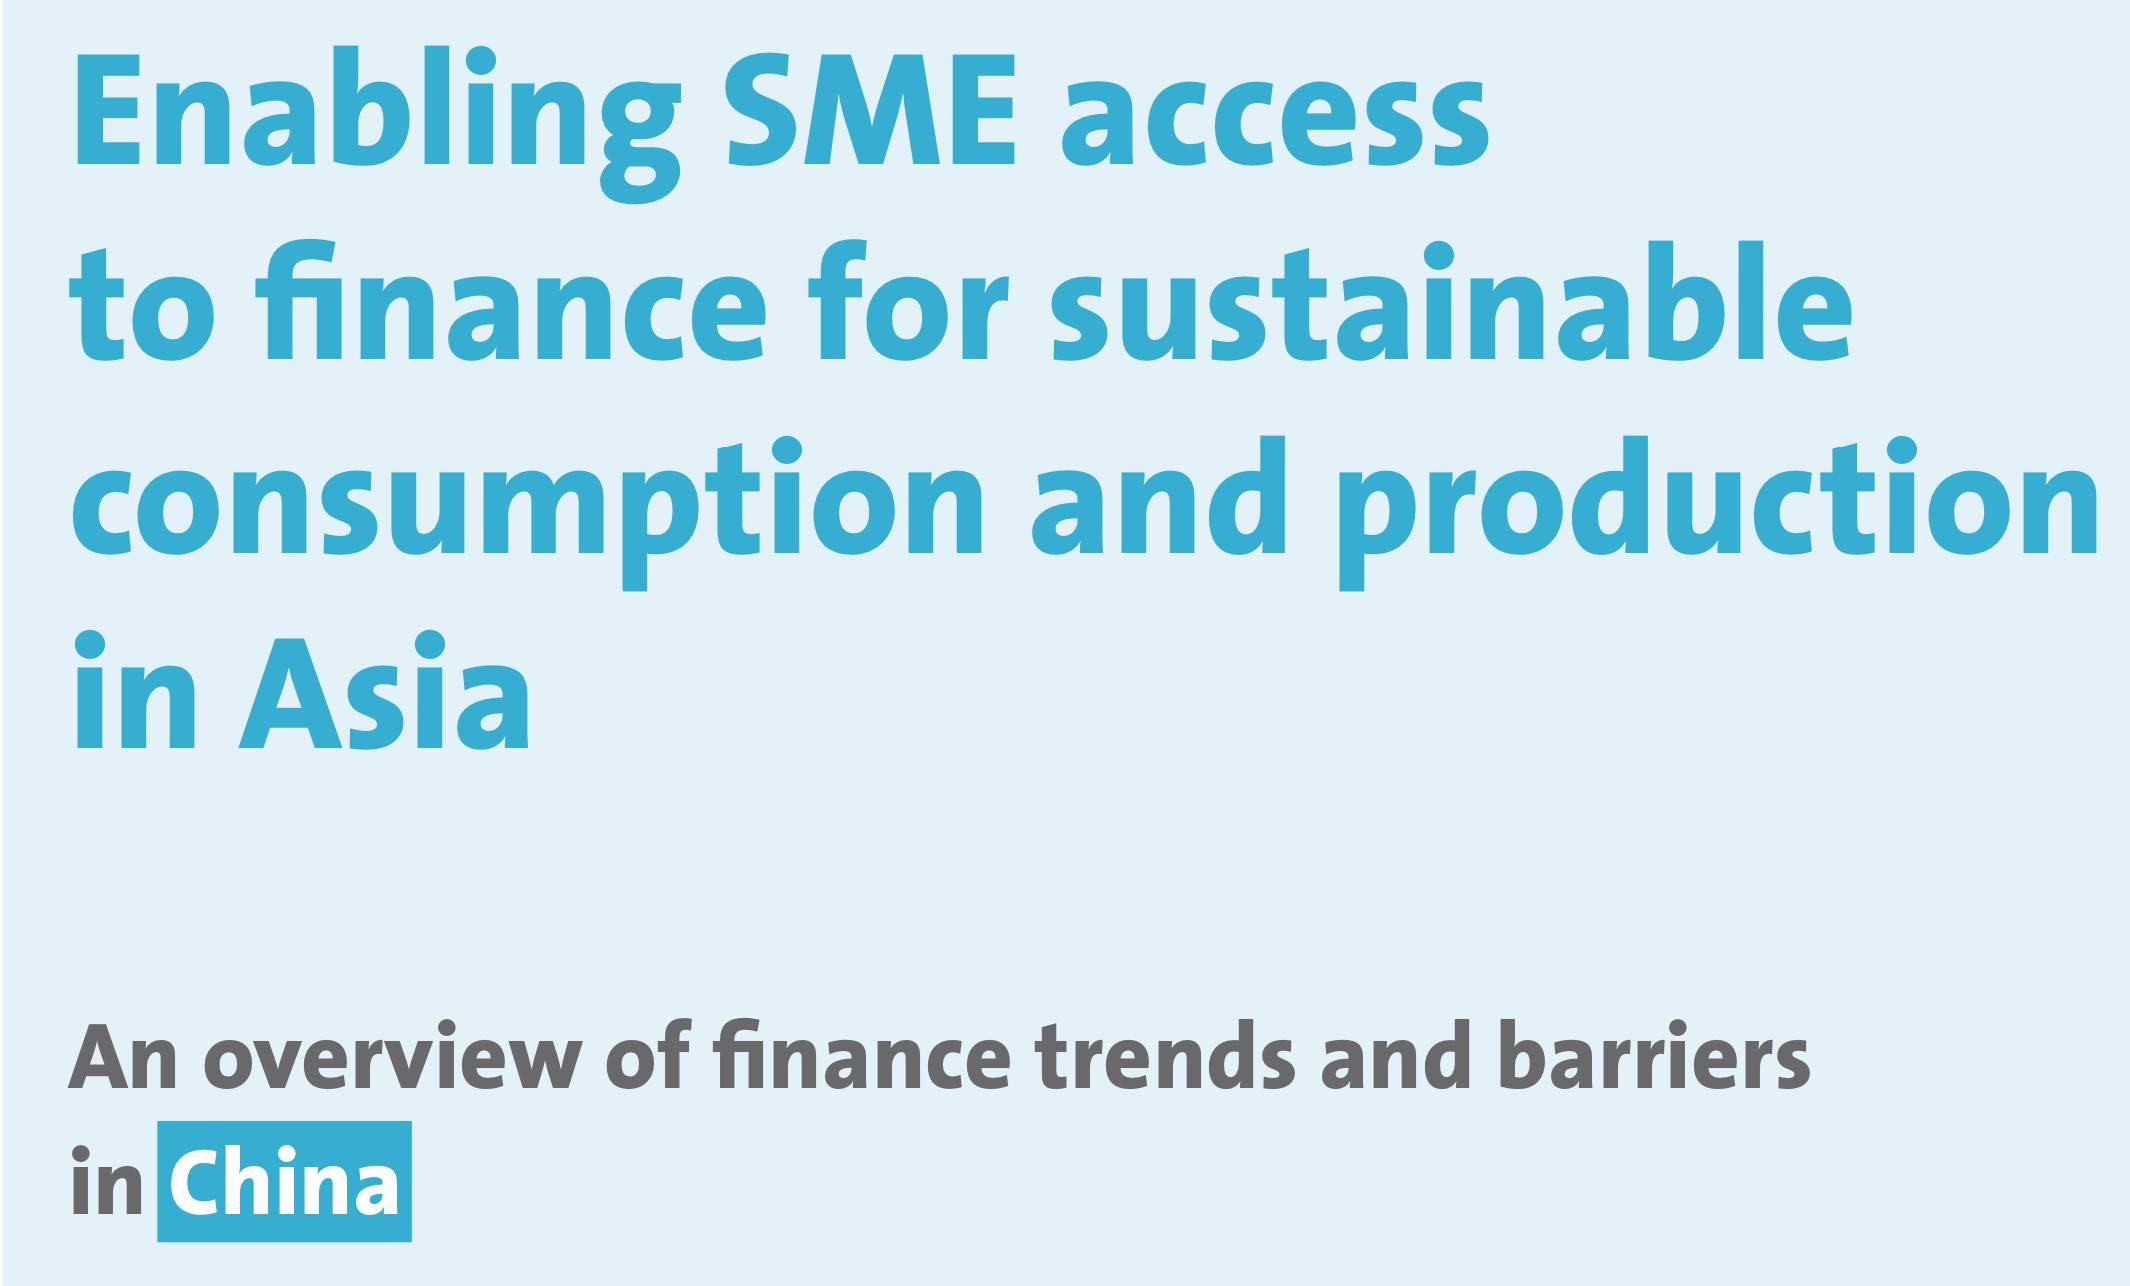 Enabling SME access to finance for sustainable consumption and production in Asia: An overview of finance trends and barriers in China